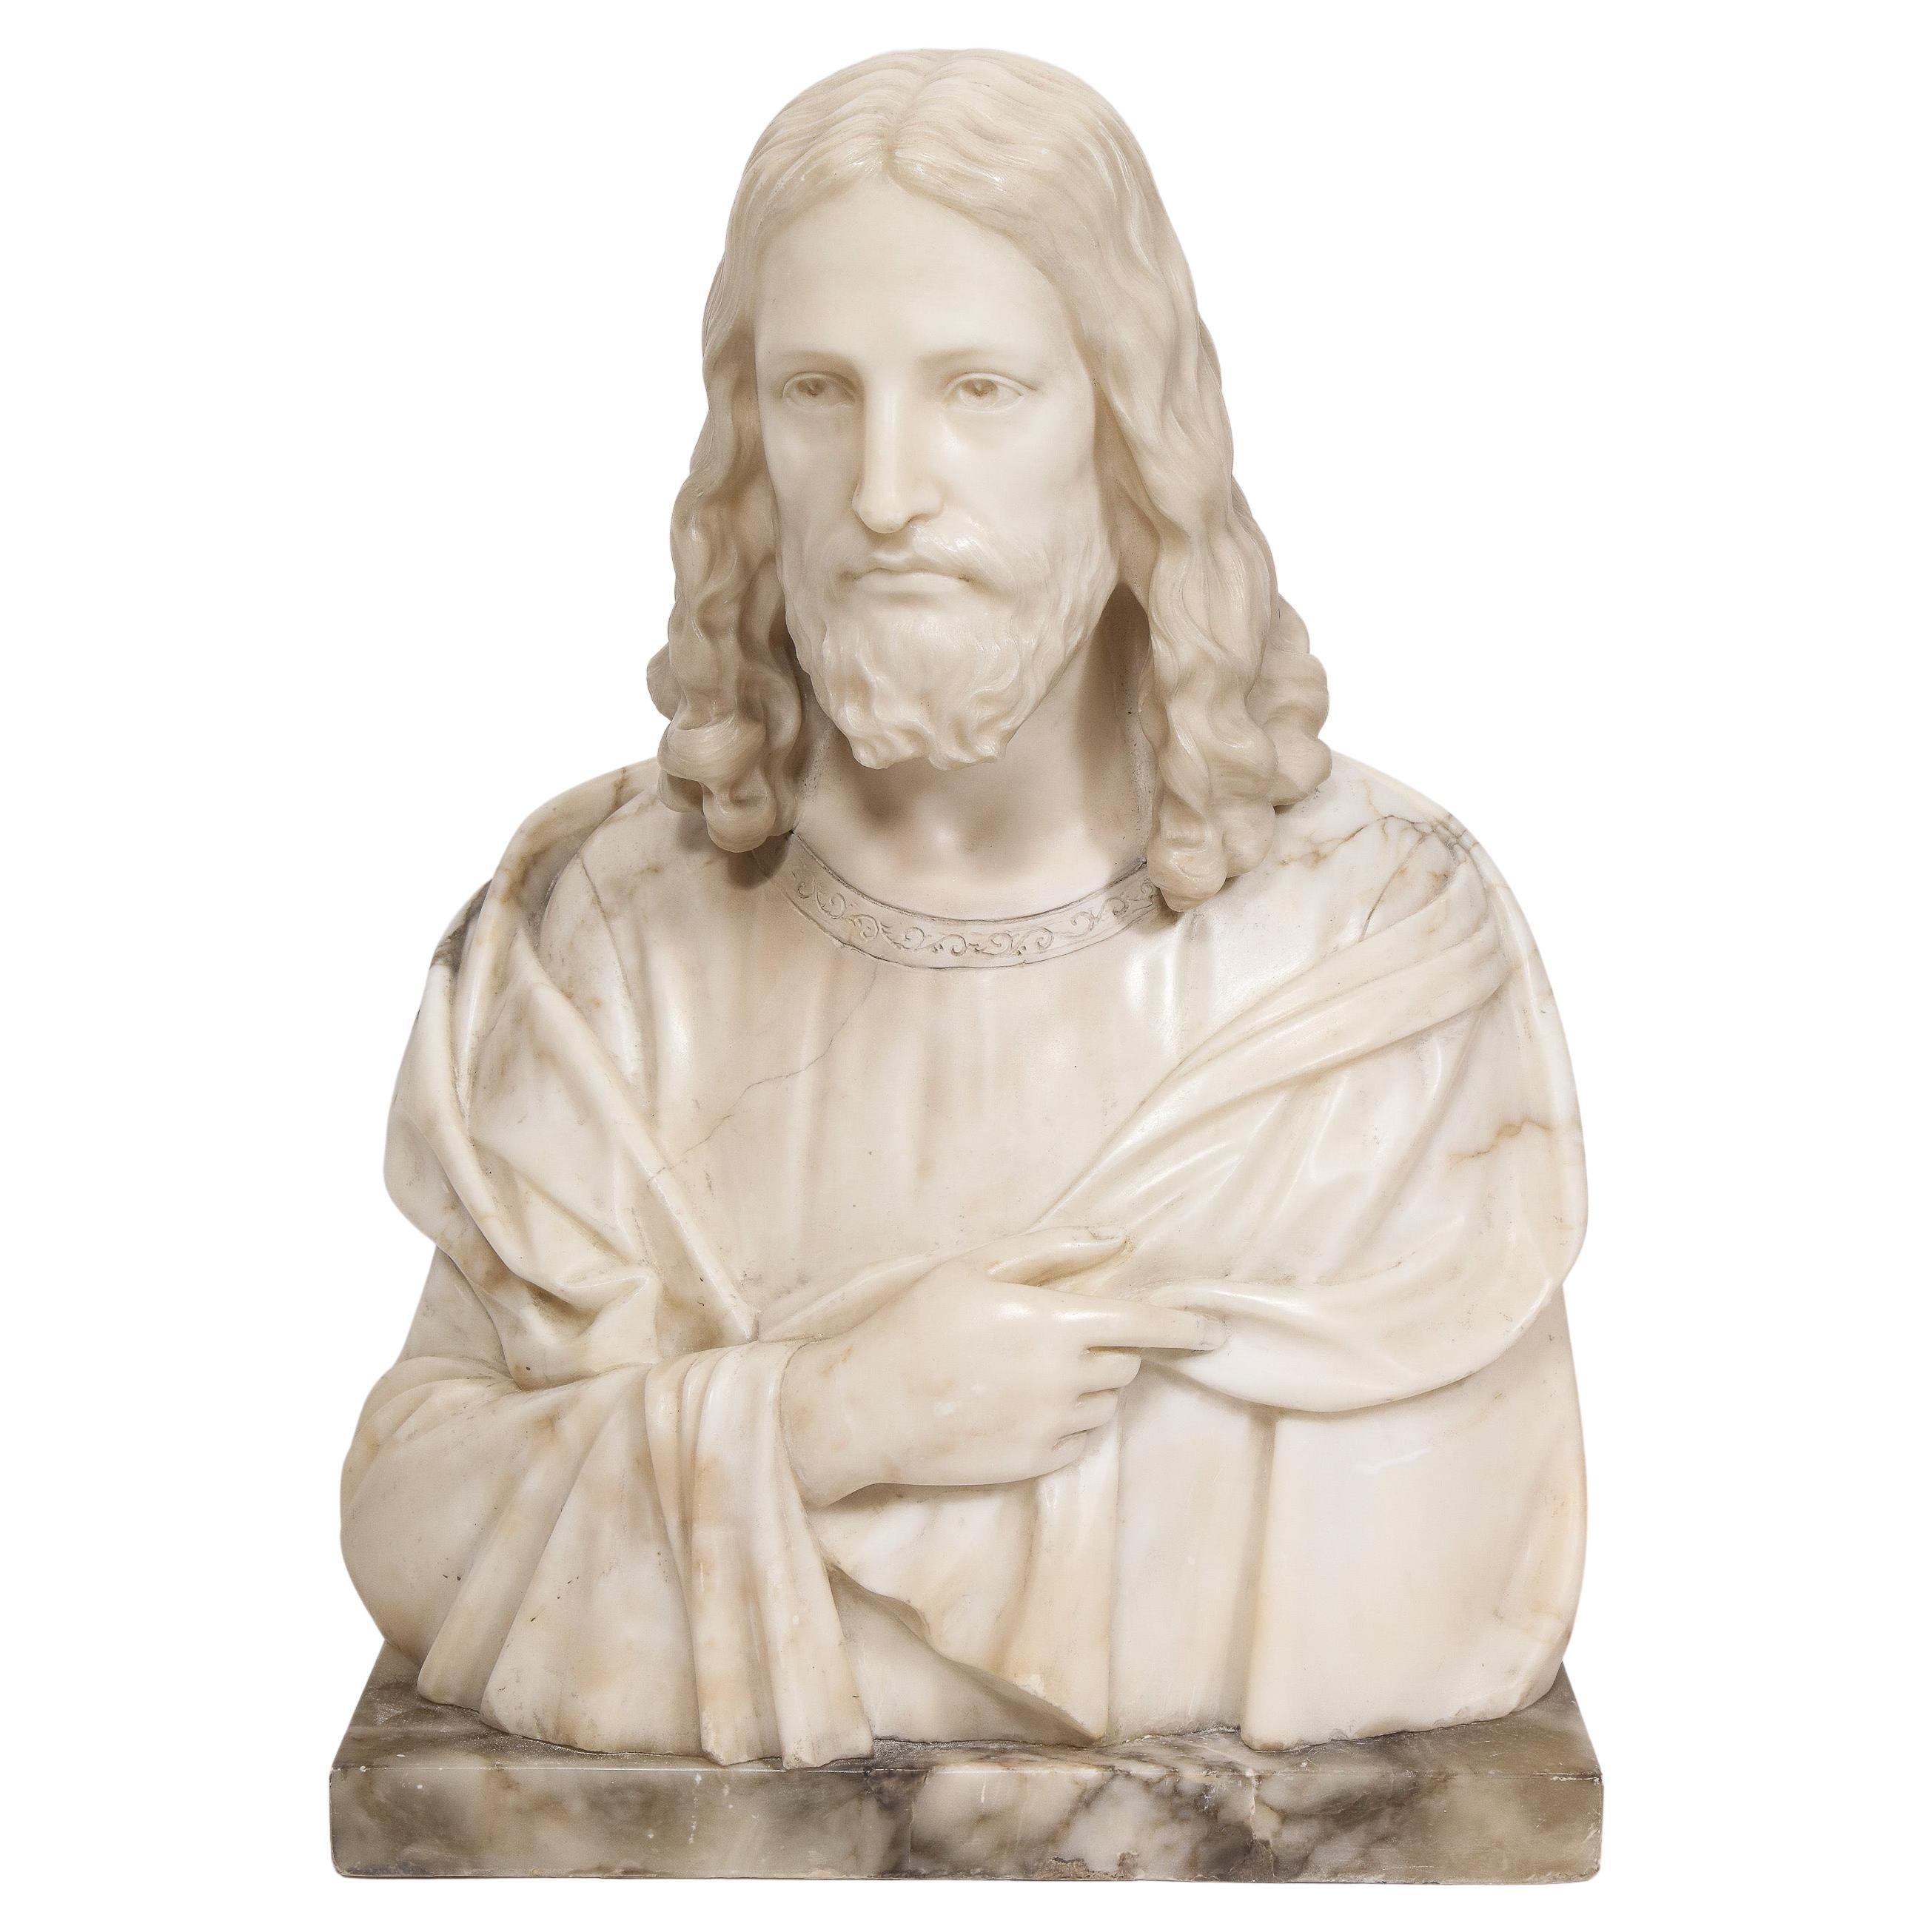 Magnificent 19th Century Italian Alabaster Bust Sculpture of Holy Jesus Christ